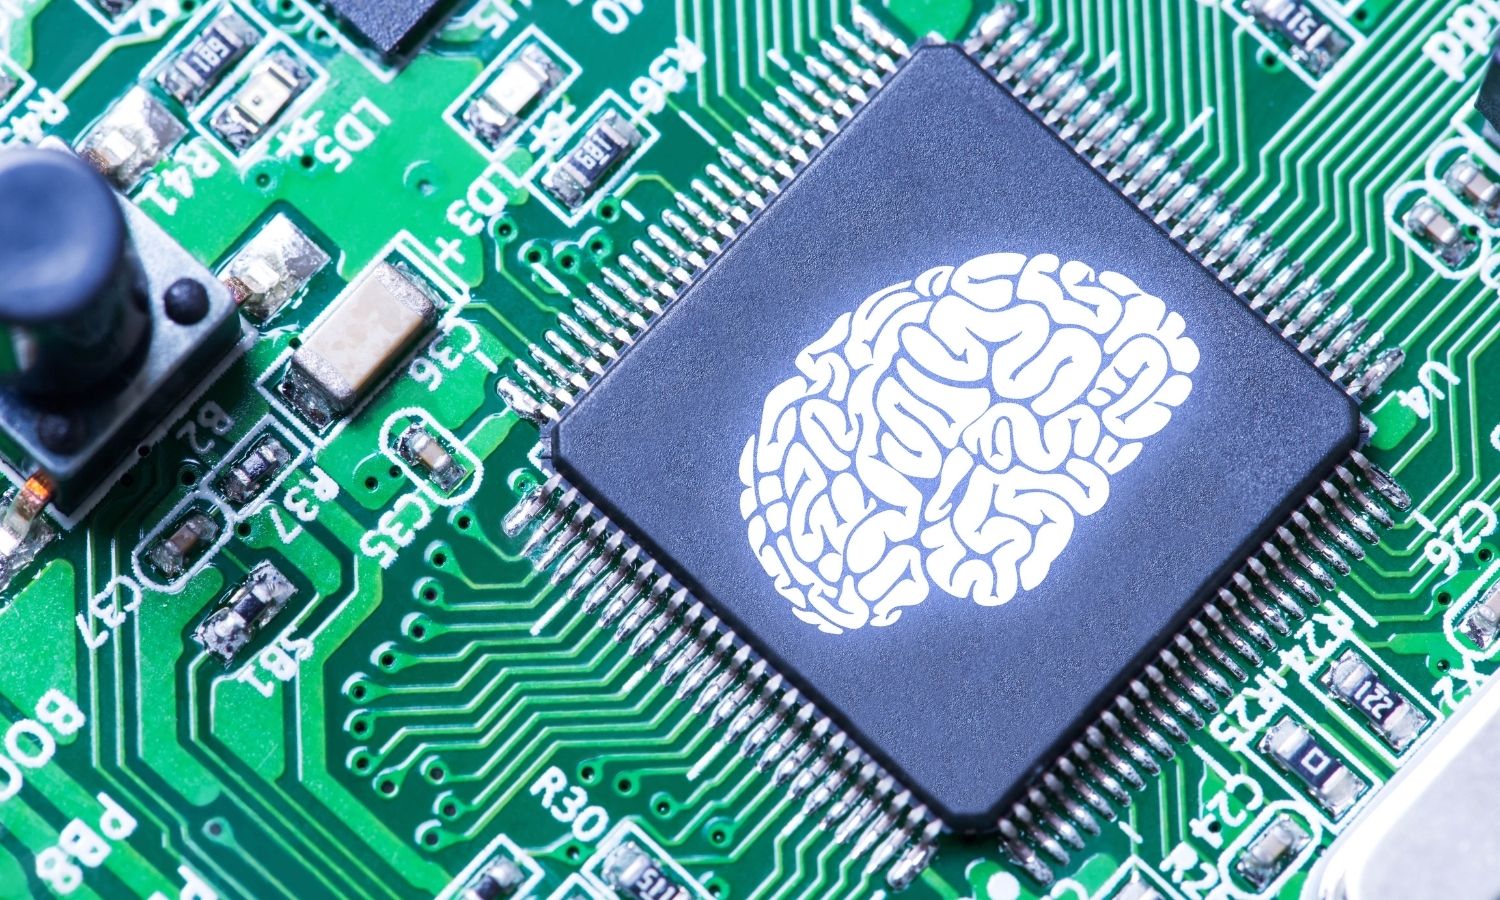 An image showing a human brain on a circuit board to illustrate bio-computing